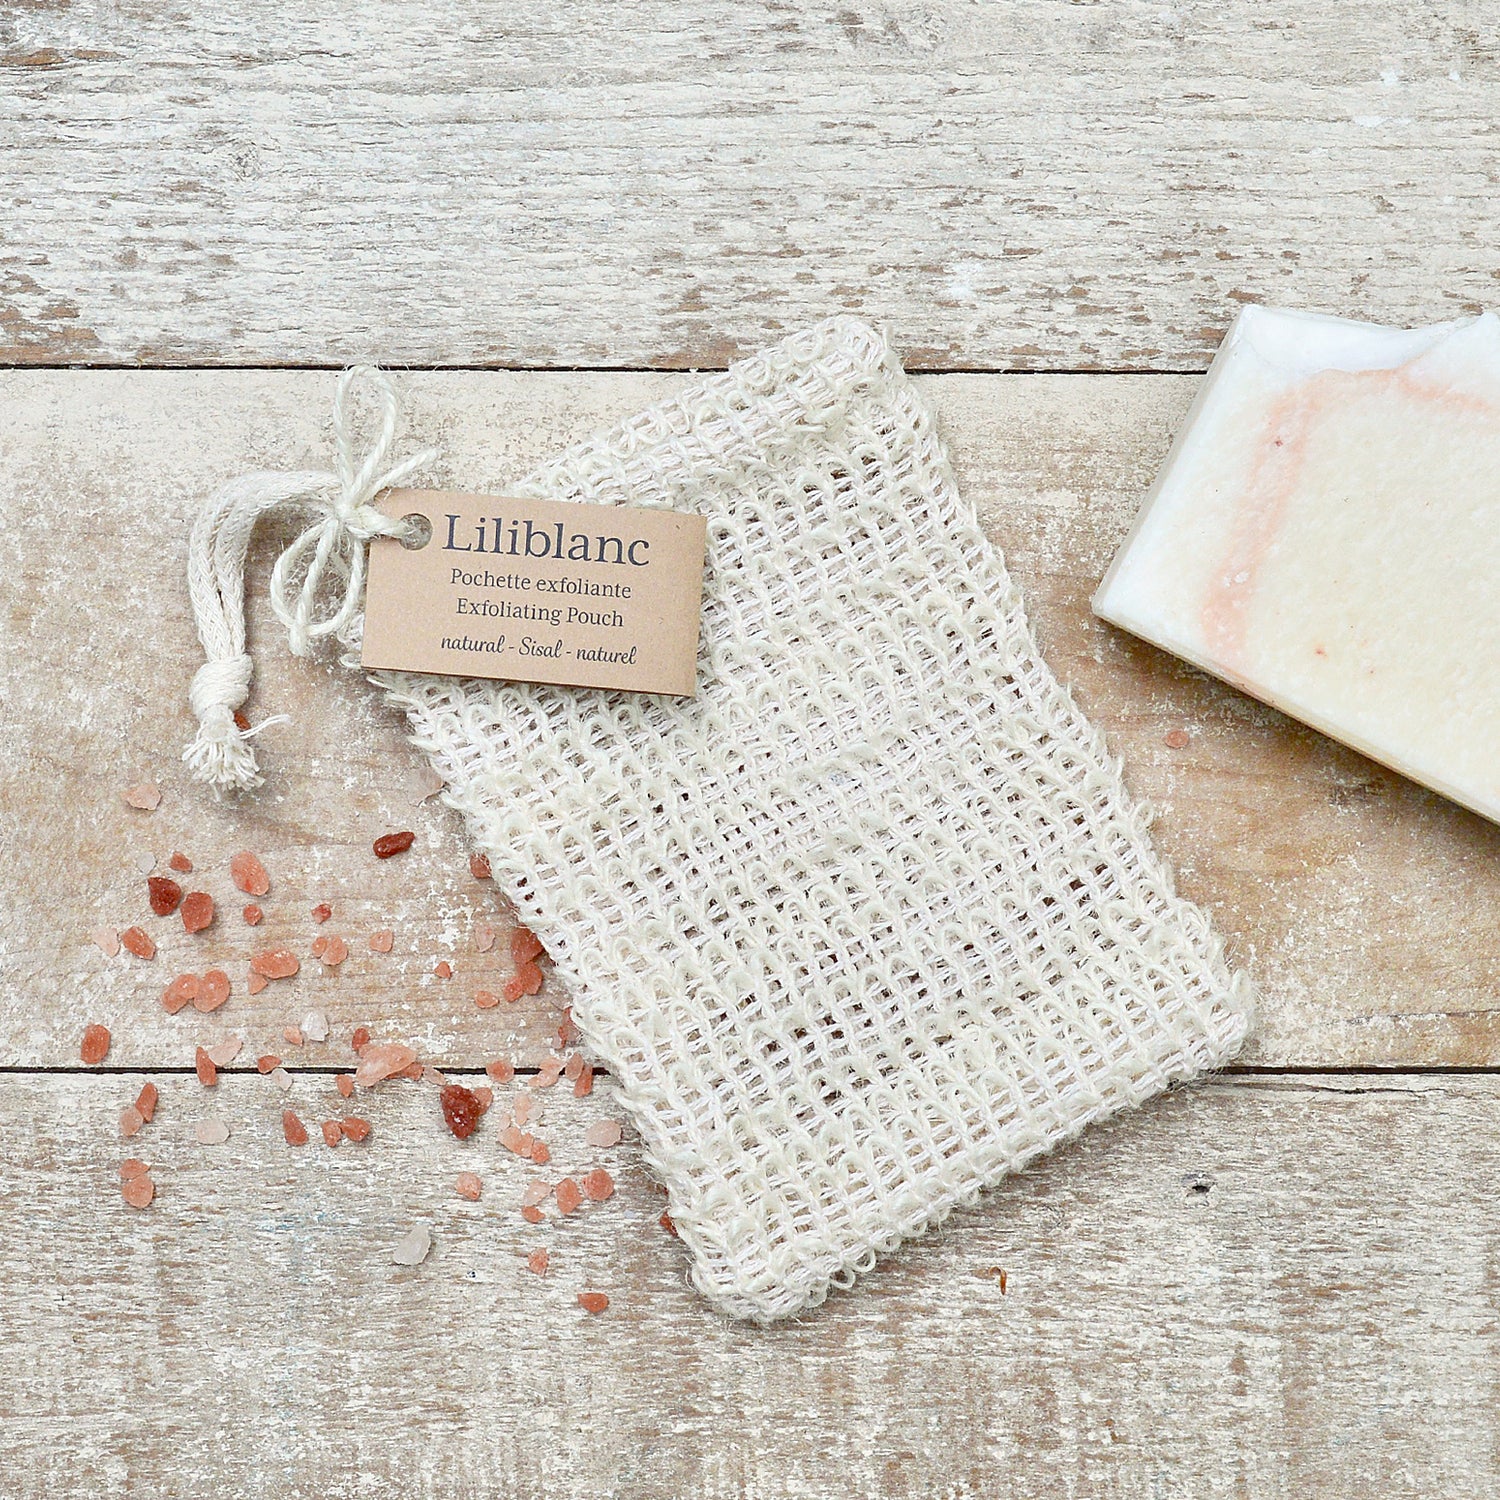 Exfoliating soap pouch